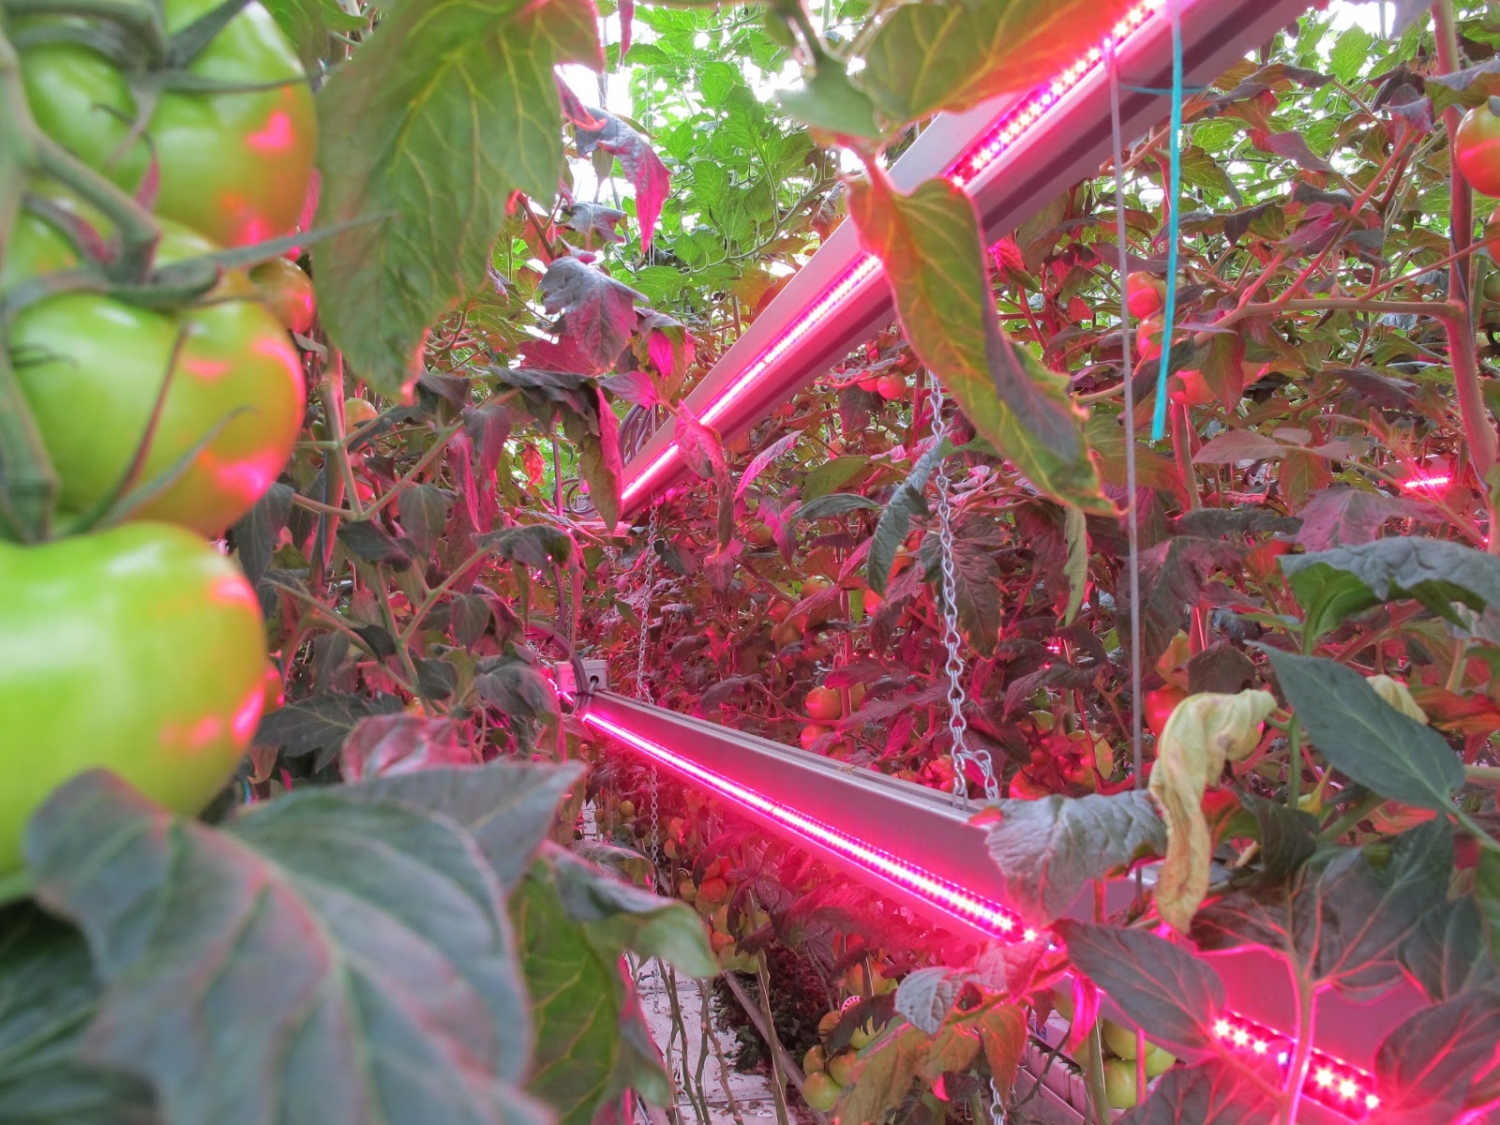 LED lights in commercial greenhouse